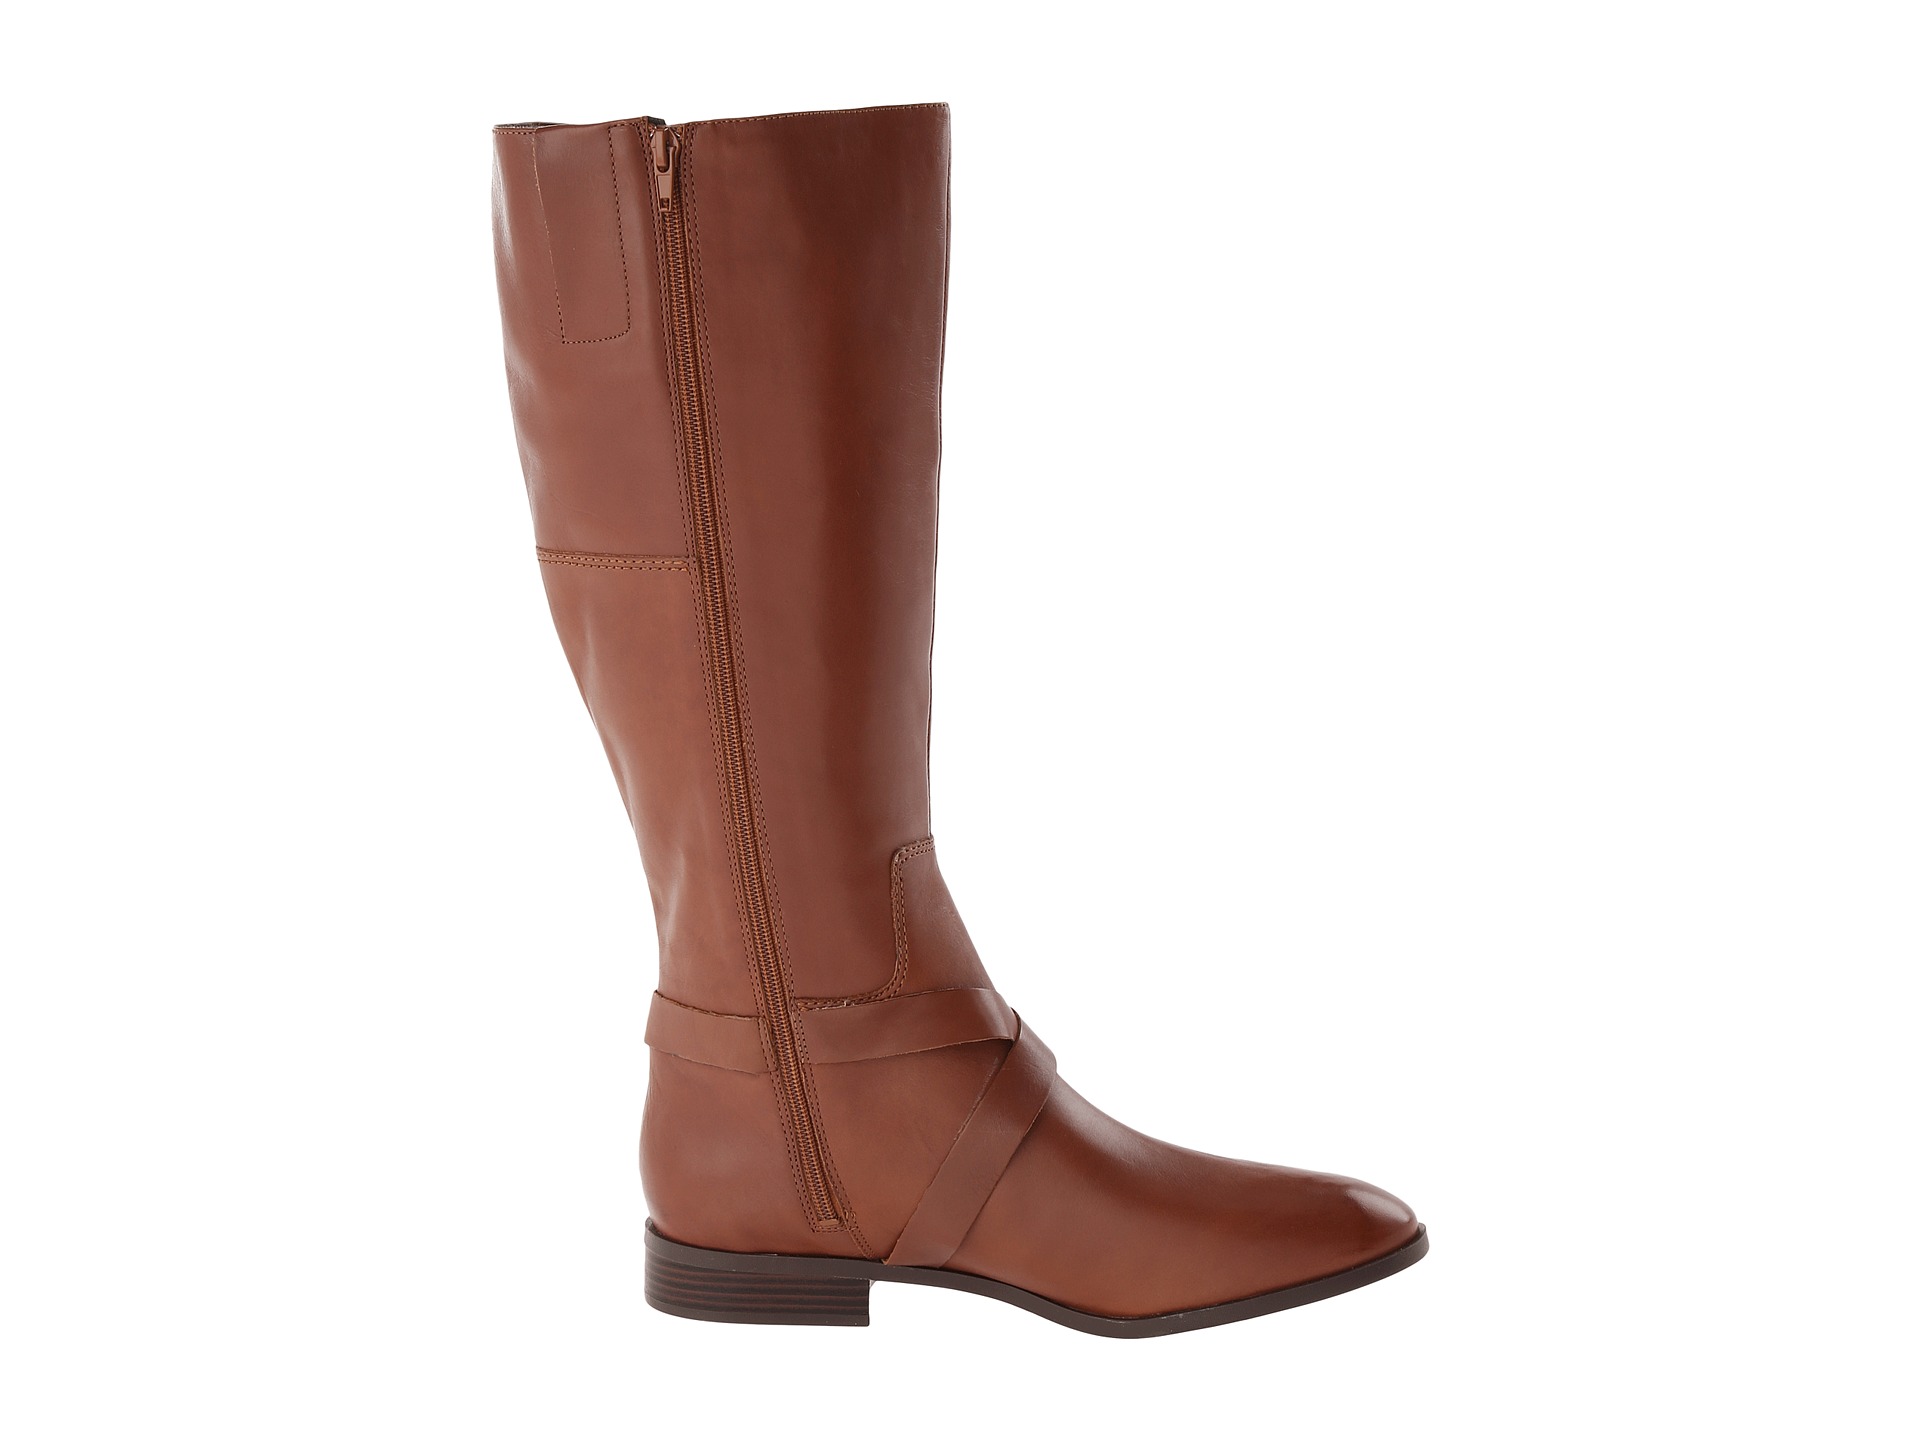 Nine West Blogger Wide Calf Dark Natural Leather | Shipped Free at Zappos